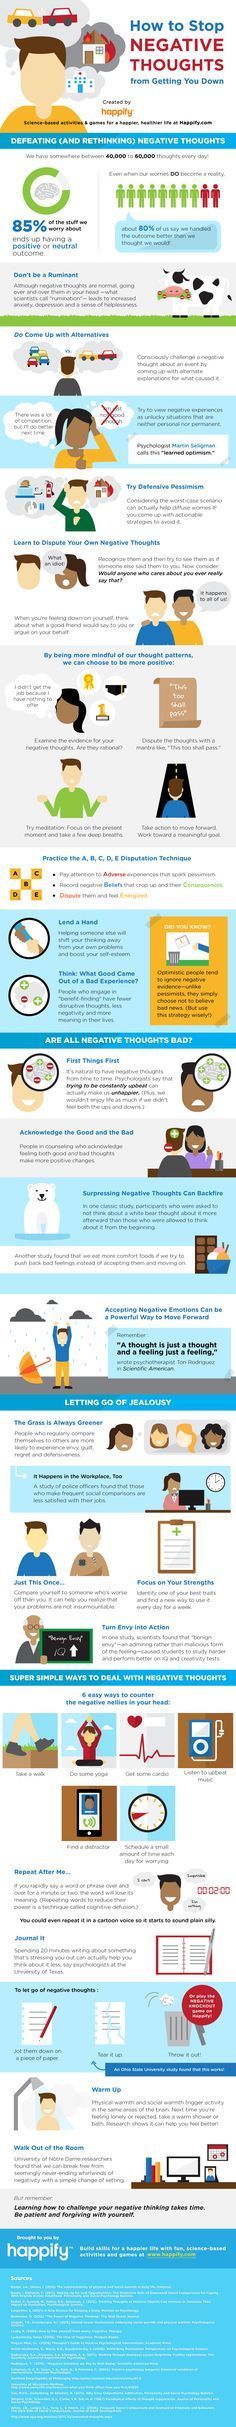 Psychology How To Stop Negative Thoughts From Getting You Down Your 